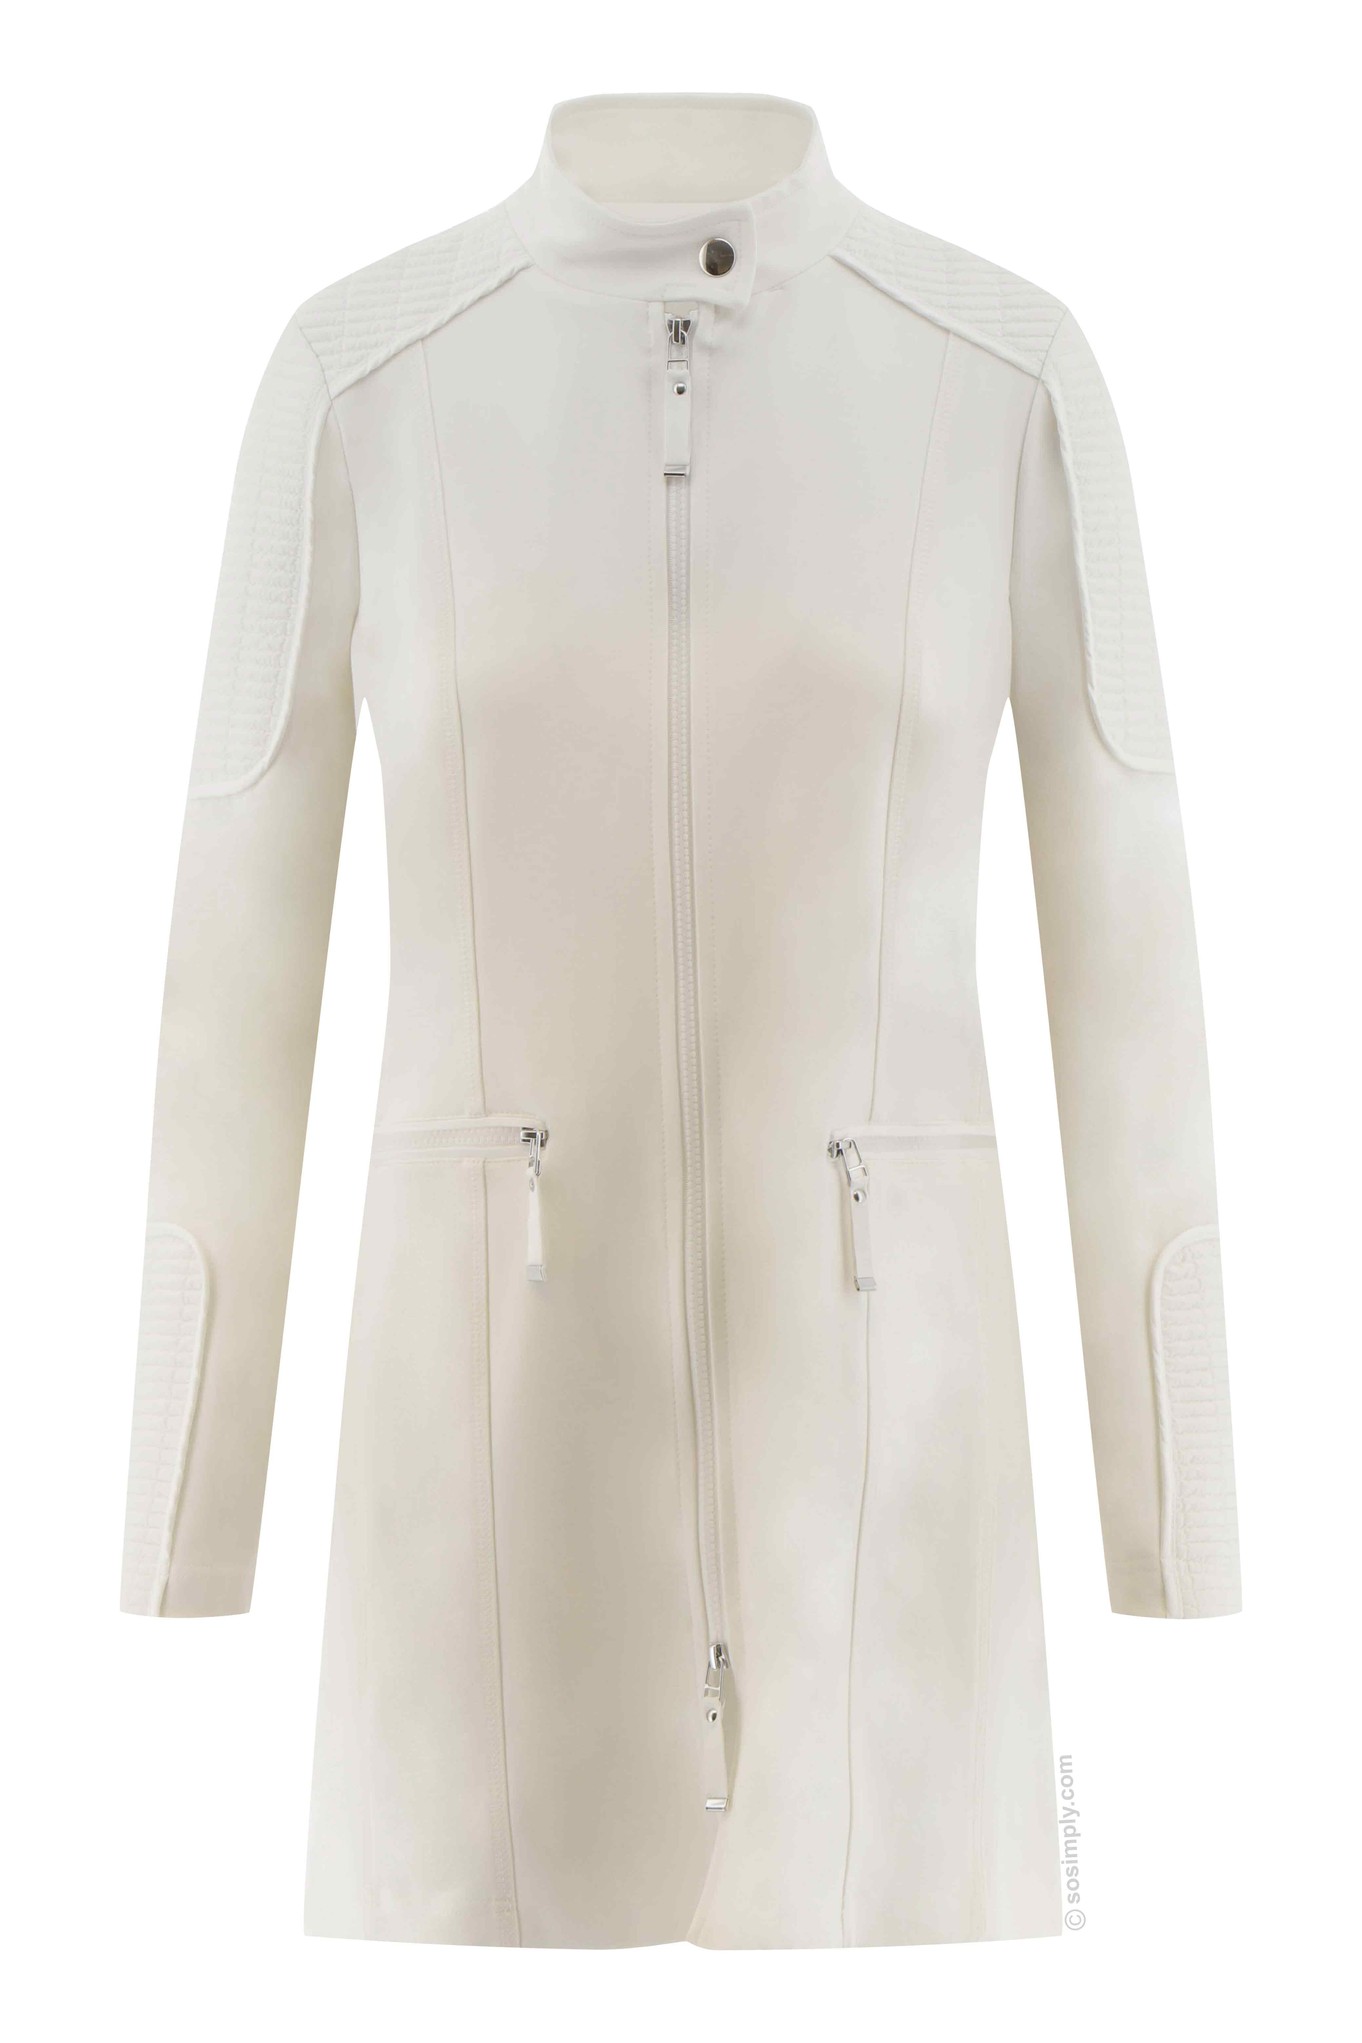 I'cona Luxe Active Long Zip Up Jacket - So Simply